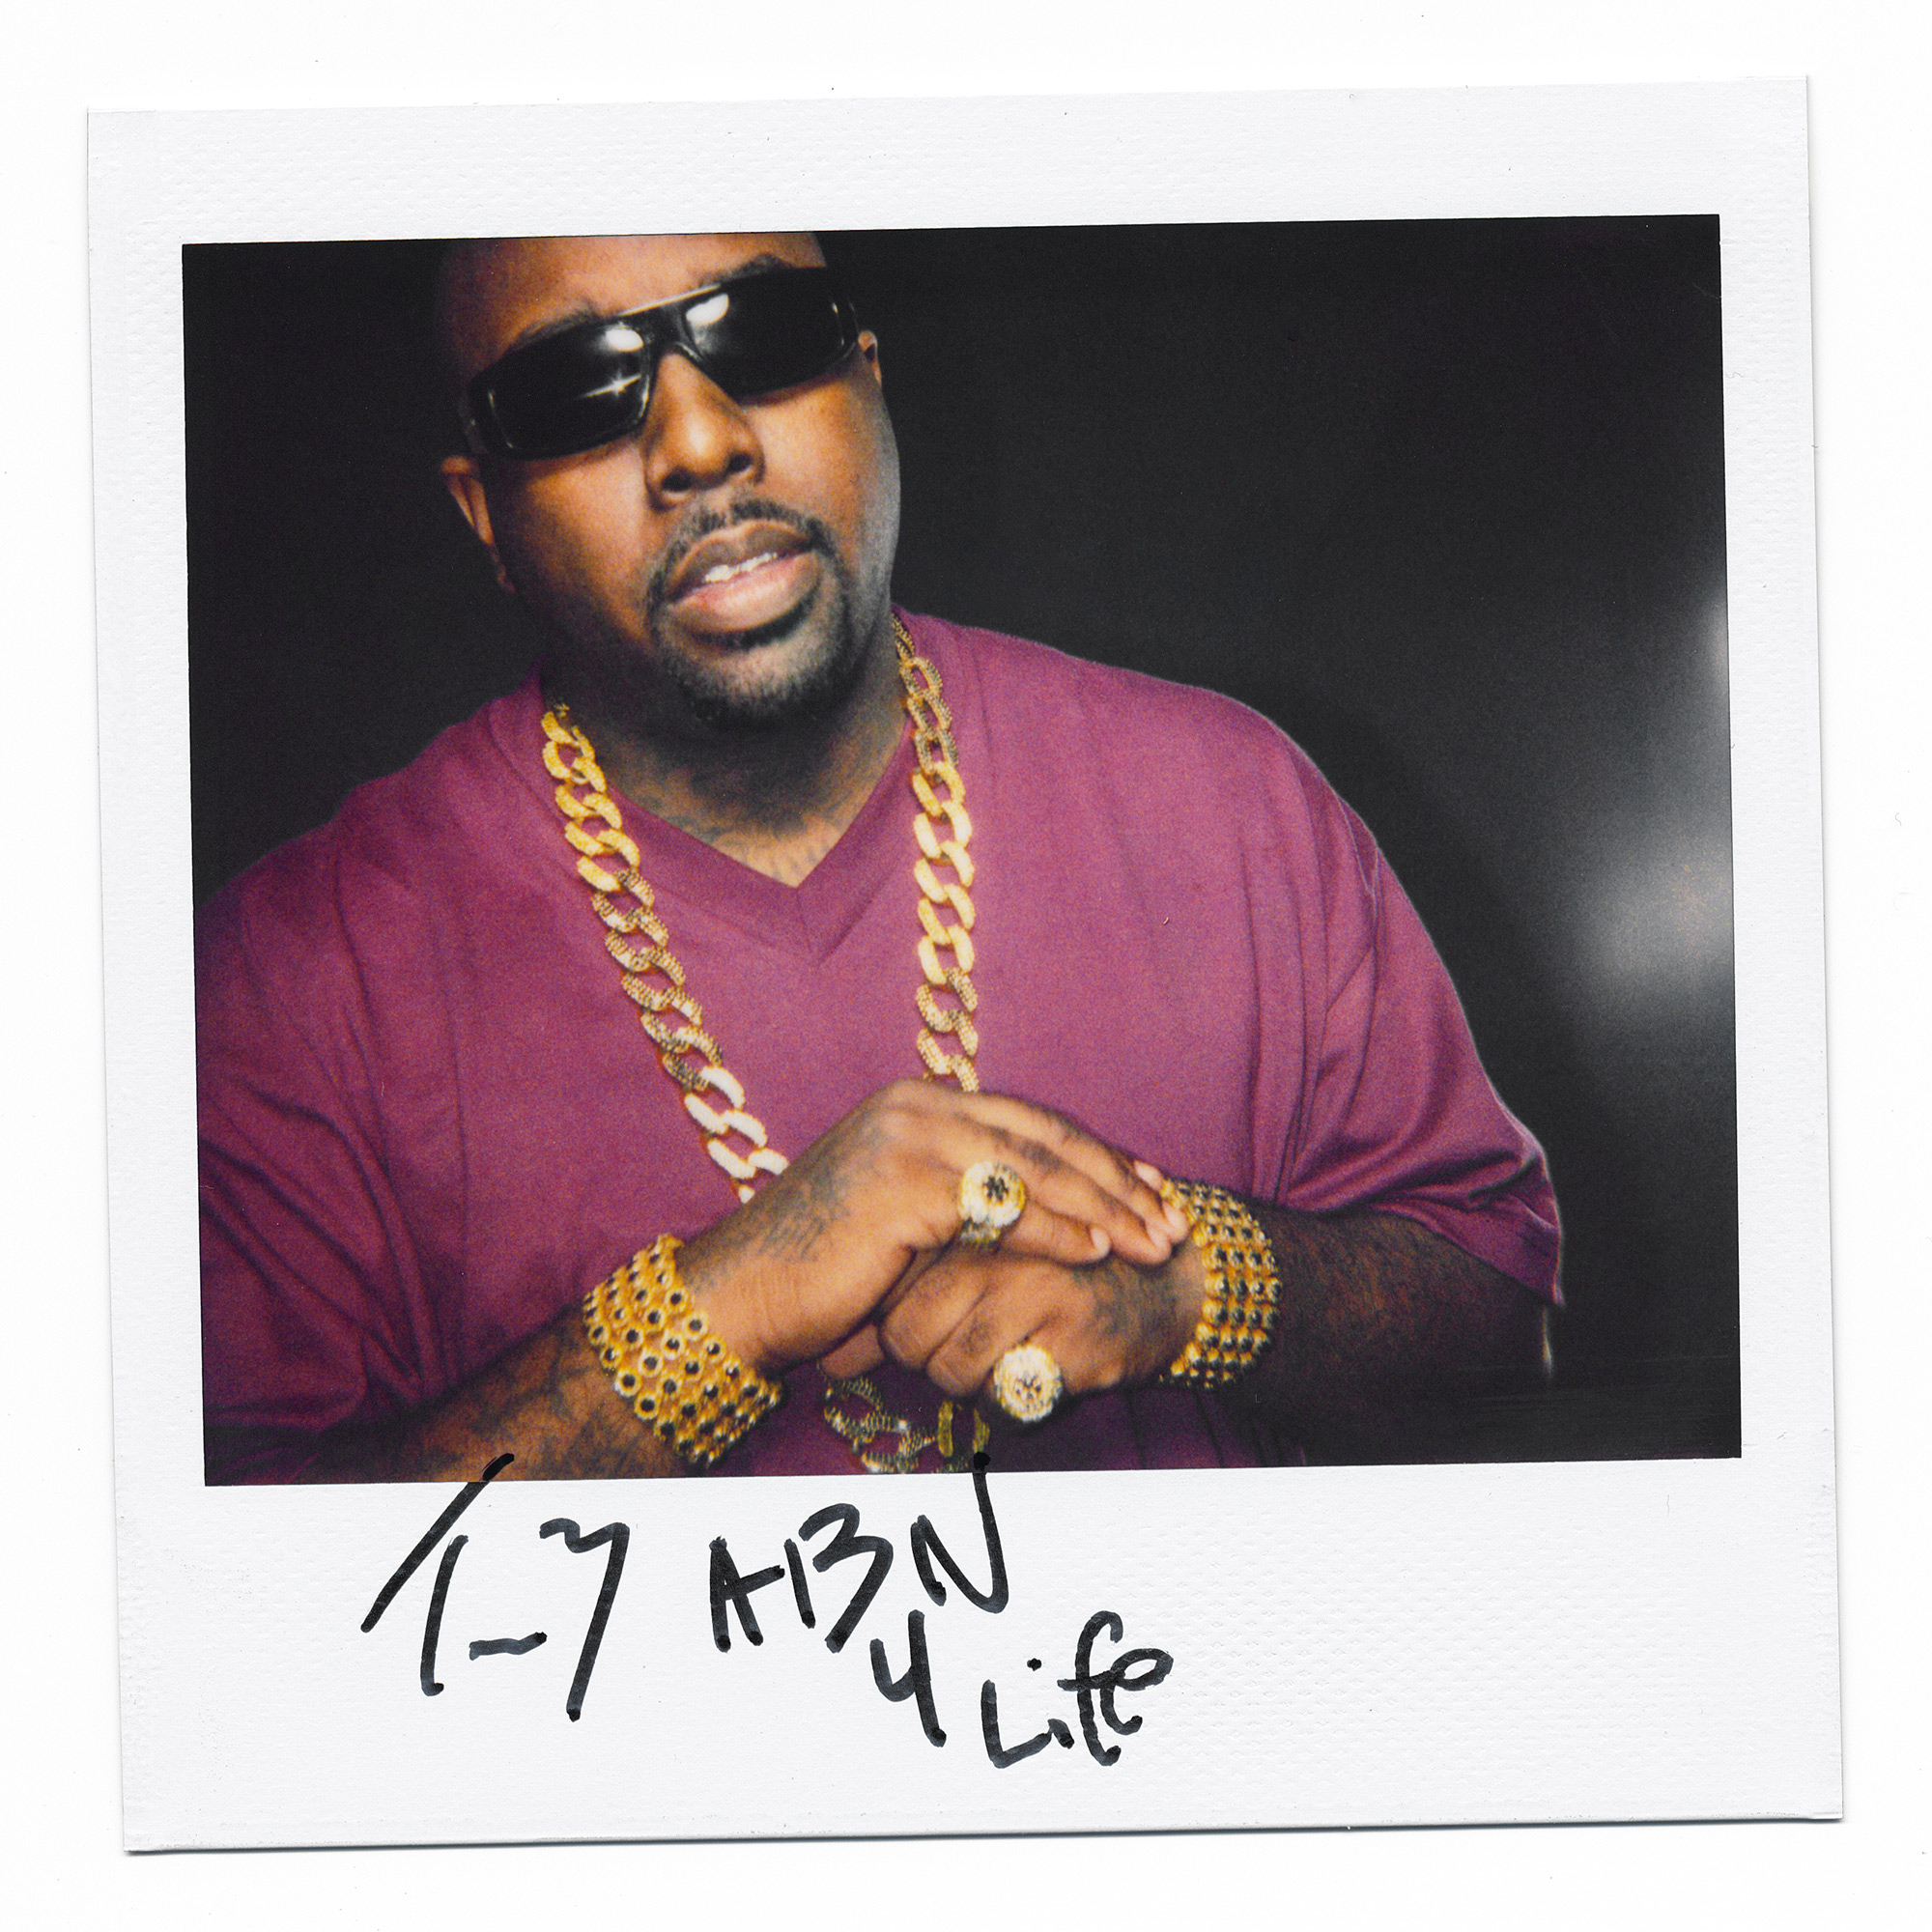 Trae Tha Truth, rapper, activist and father, photographed in studio in Houston, Texas by Houston music photographer, Todd Spoth on Polaroid film.